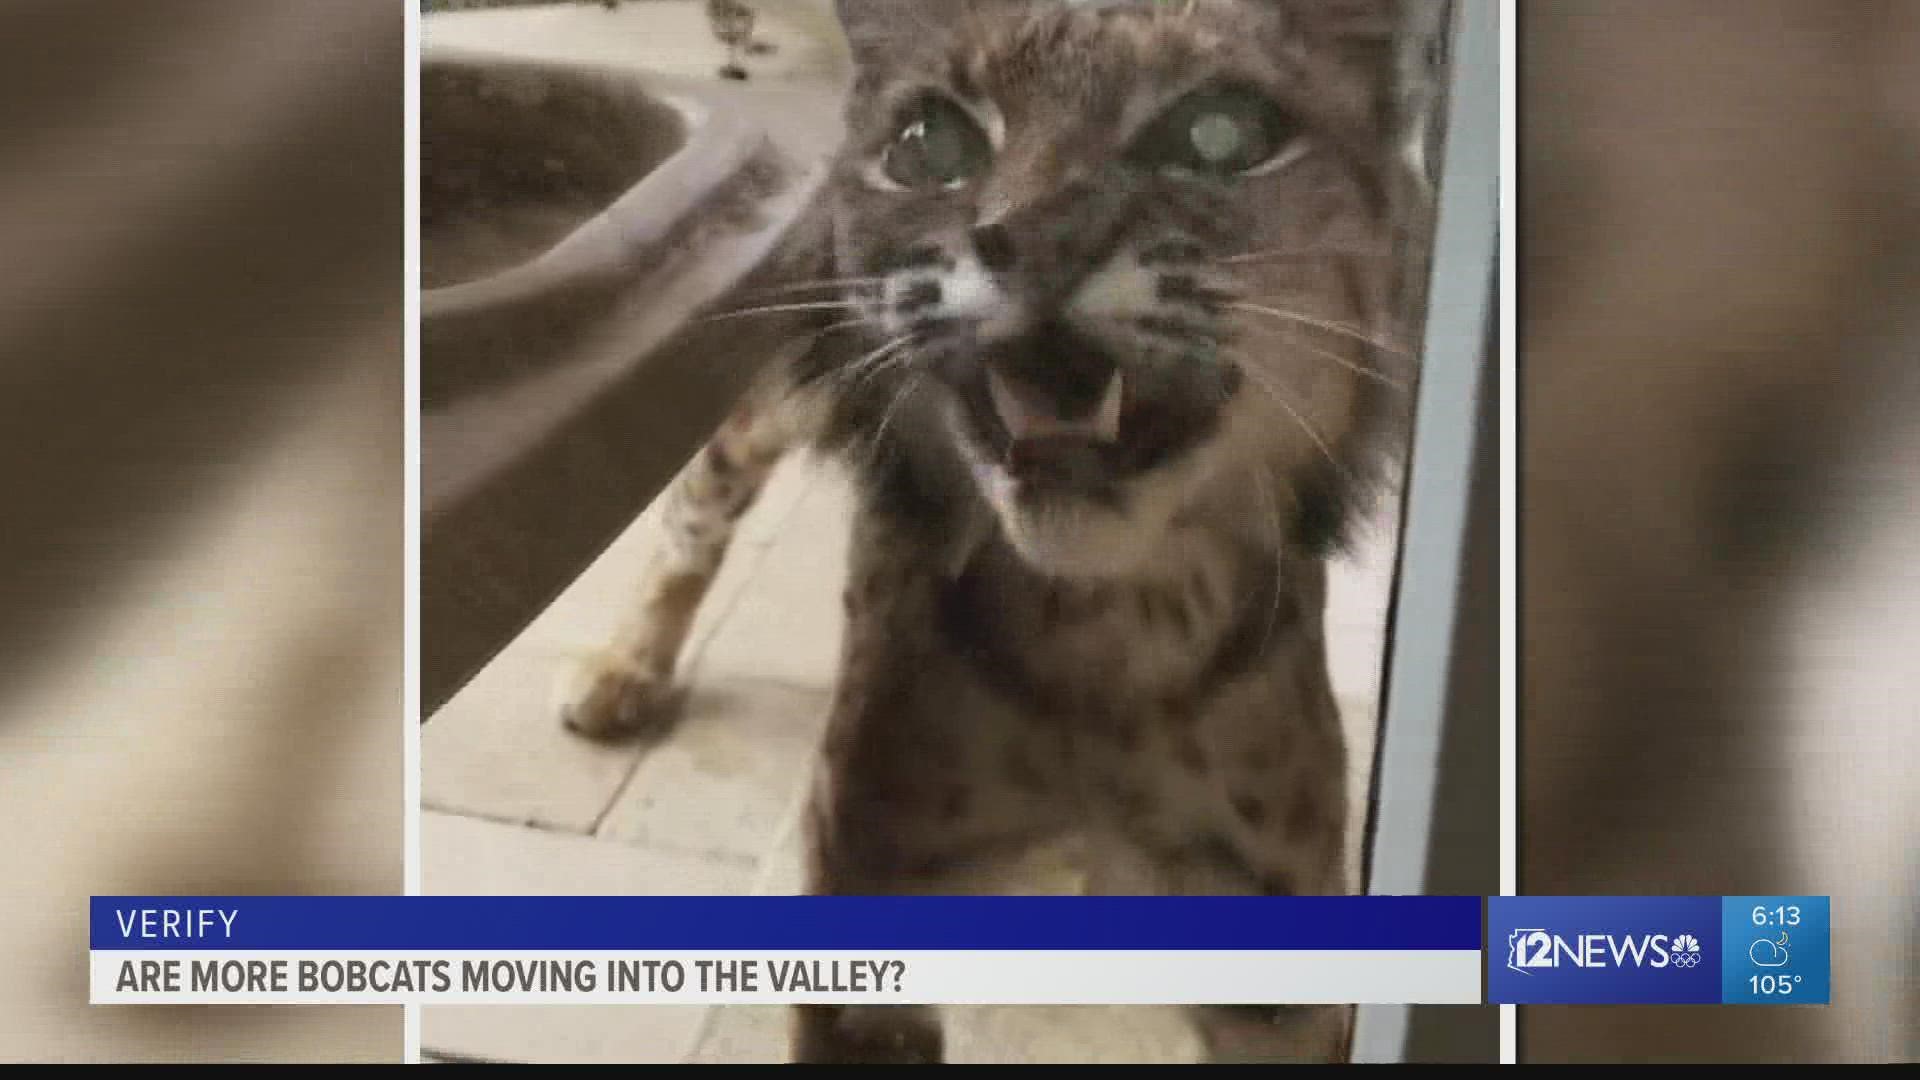 VERIFY: Are bobcats moving into the Valley? 